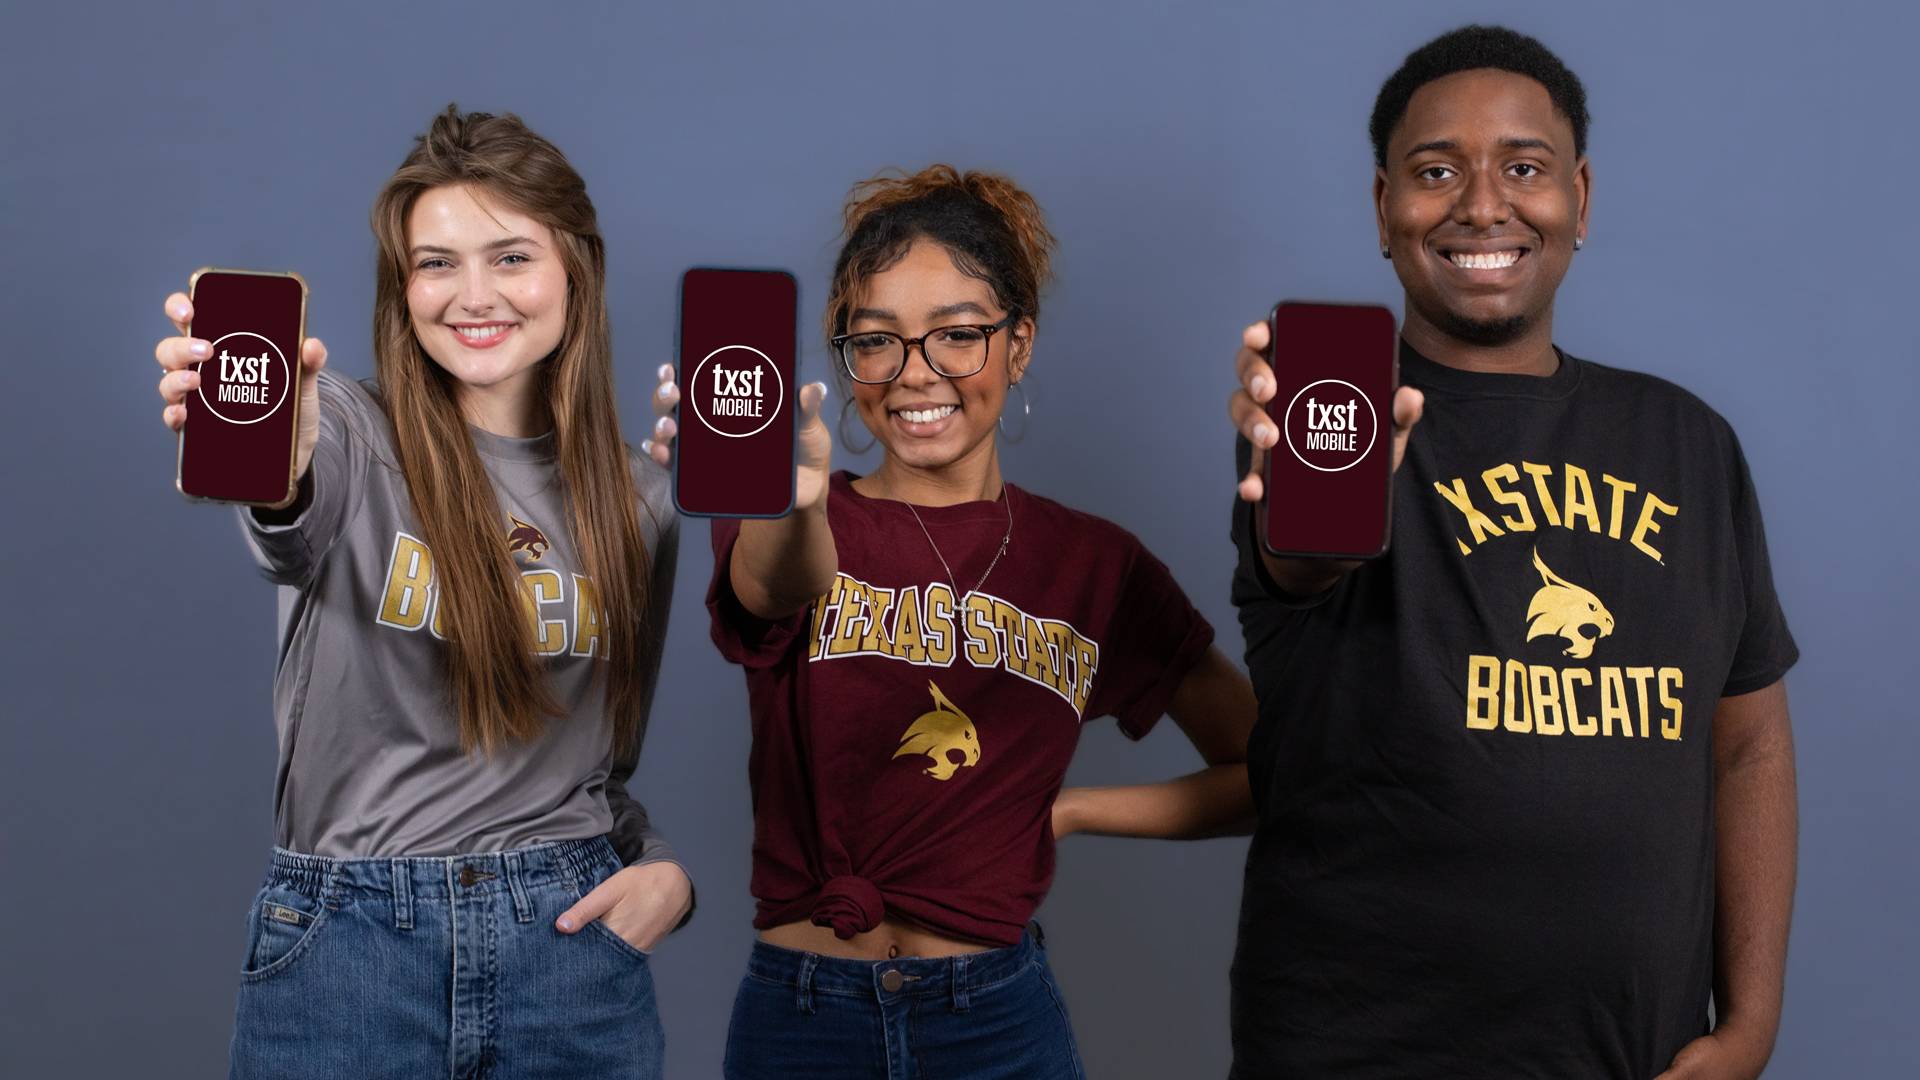 Three students holding mobile devices showing the TXST Mobile logo on the screens.